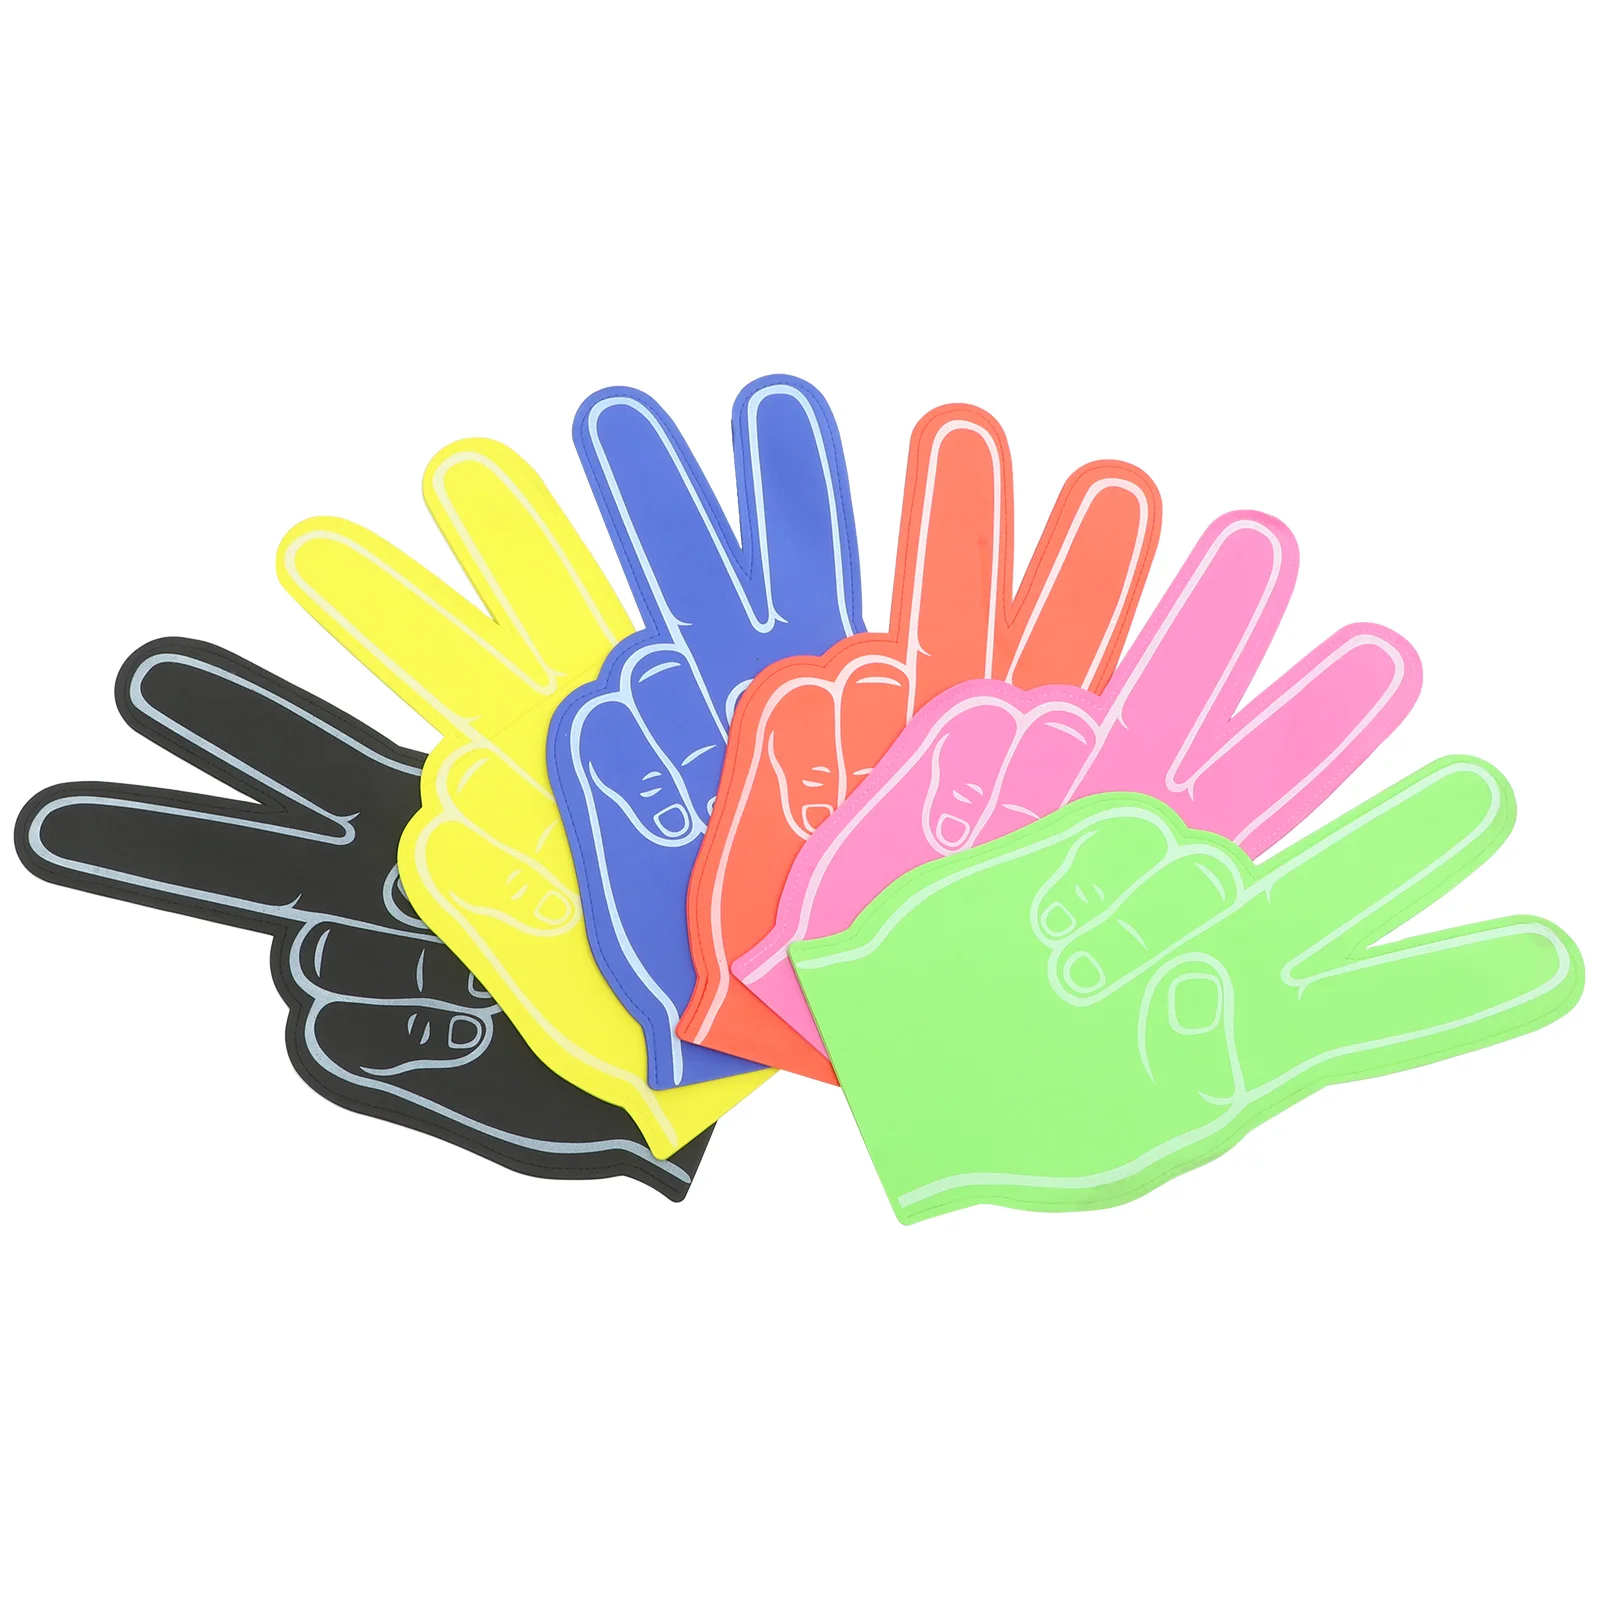 6Pcs Sports Cheering Foam Hands Football Party Favors Novelty Foam Fingers Sports Event Cheer Props led glow sticks colorful rgb fluorescent luminous foam stick cheer tube glowing light for wedding birthday party props wholesale